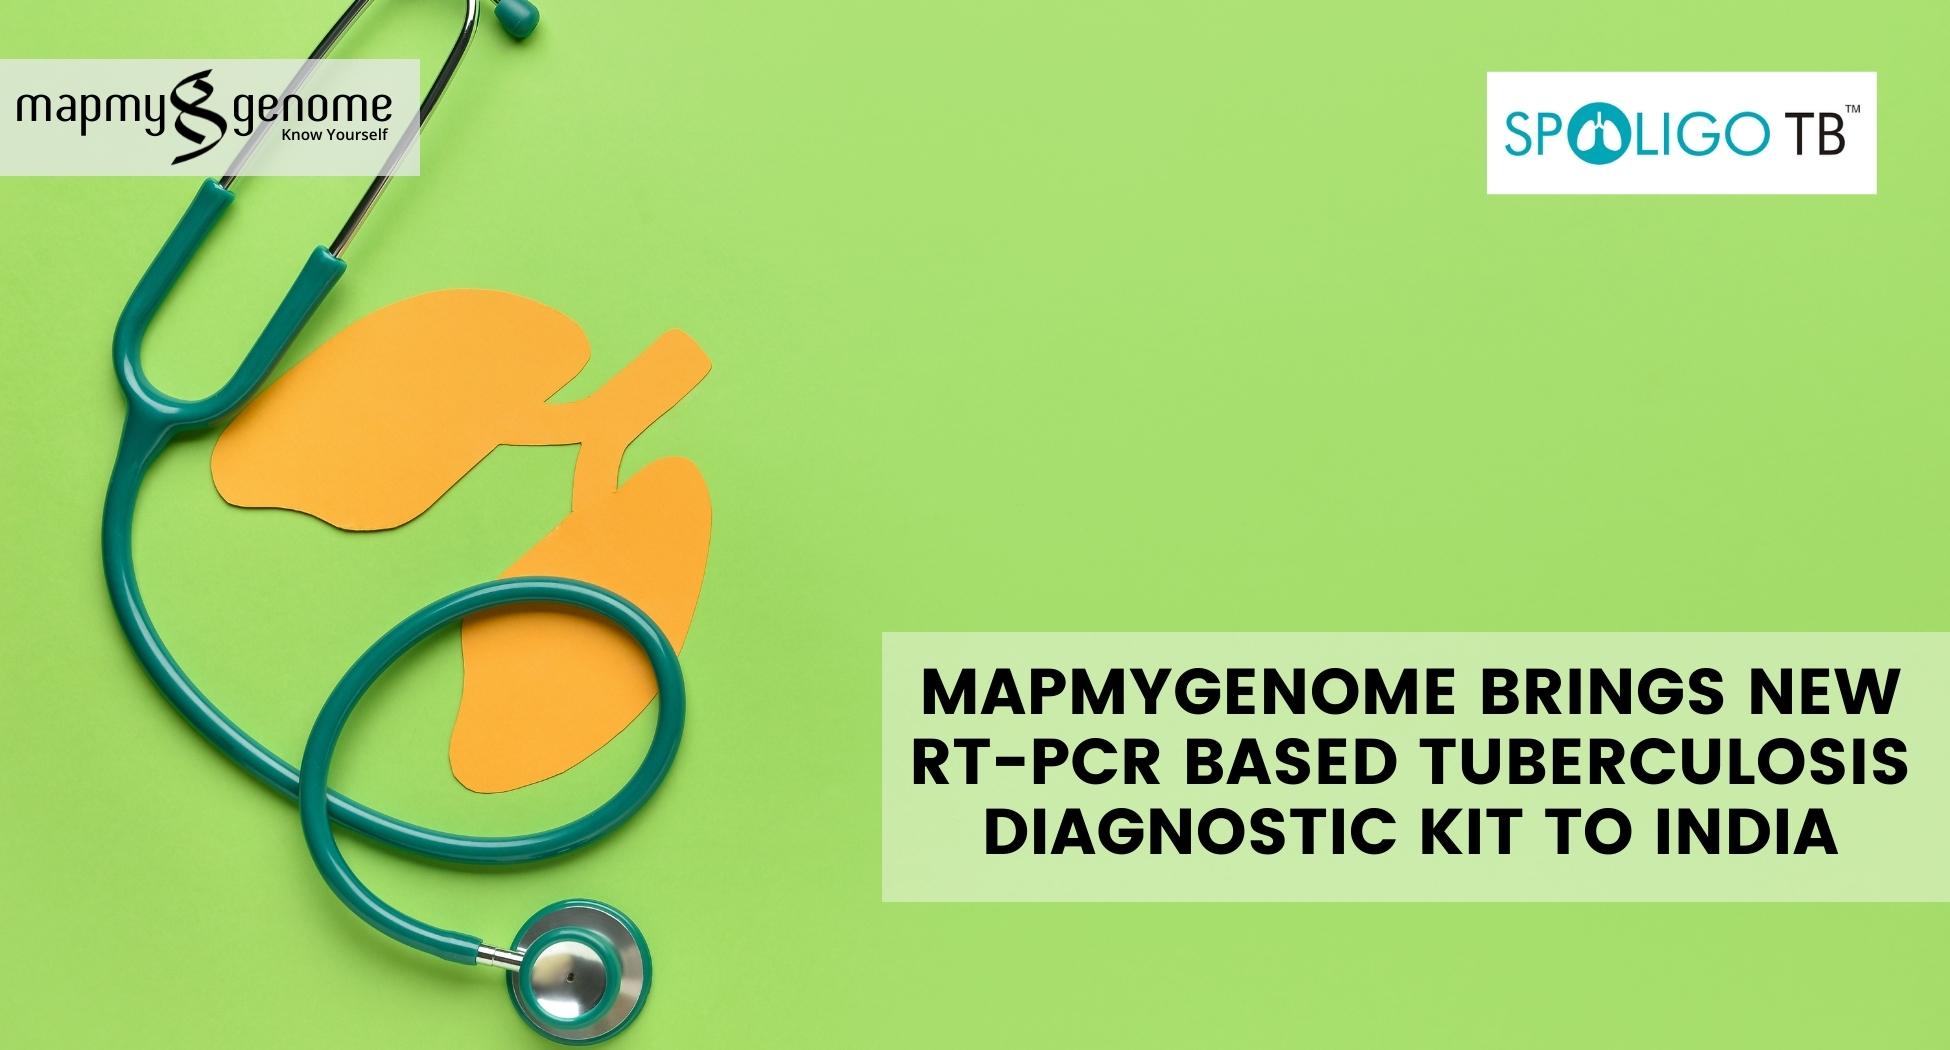 Mapmygenome Brings New RT-PCR Based Tuberculosis Diagnostic Kit To India